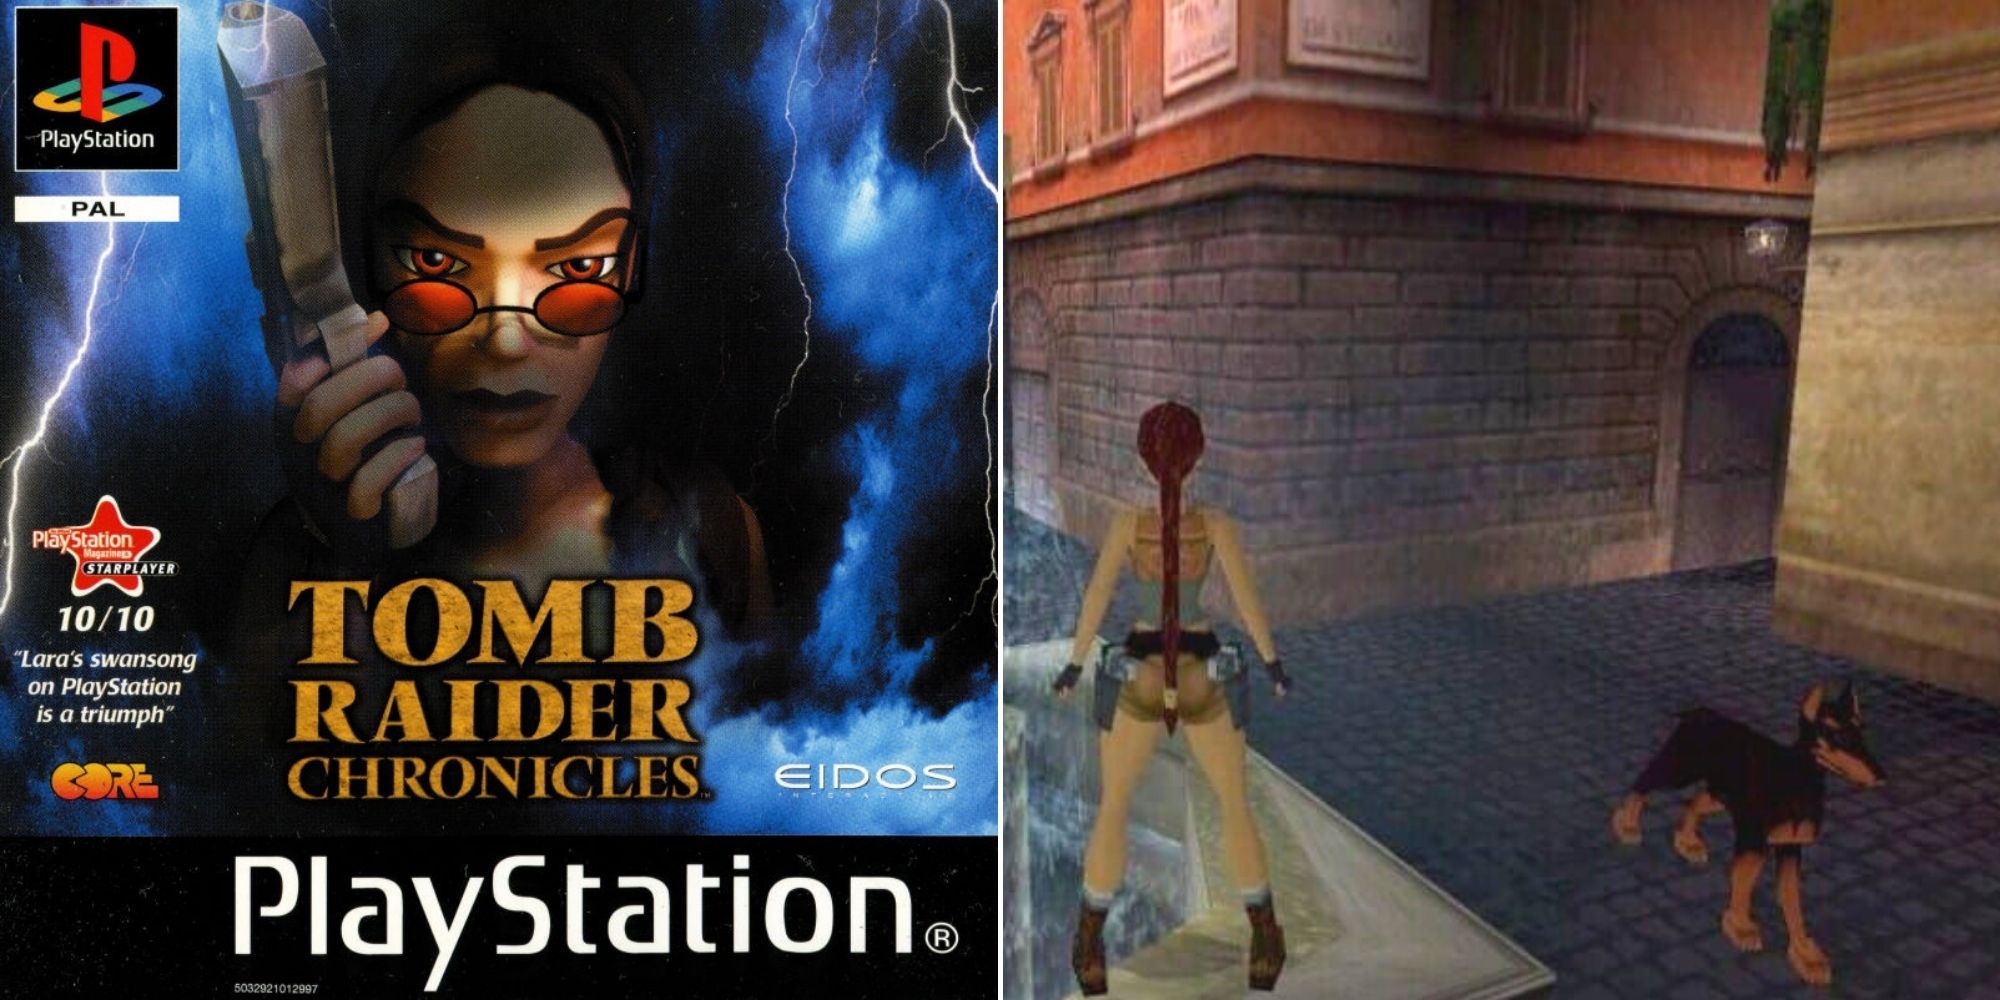 Tomb Raider: Chronicles: Cover art and Lara Croft standing near a dog